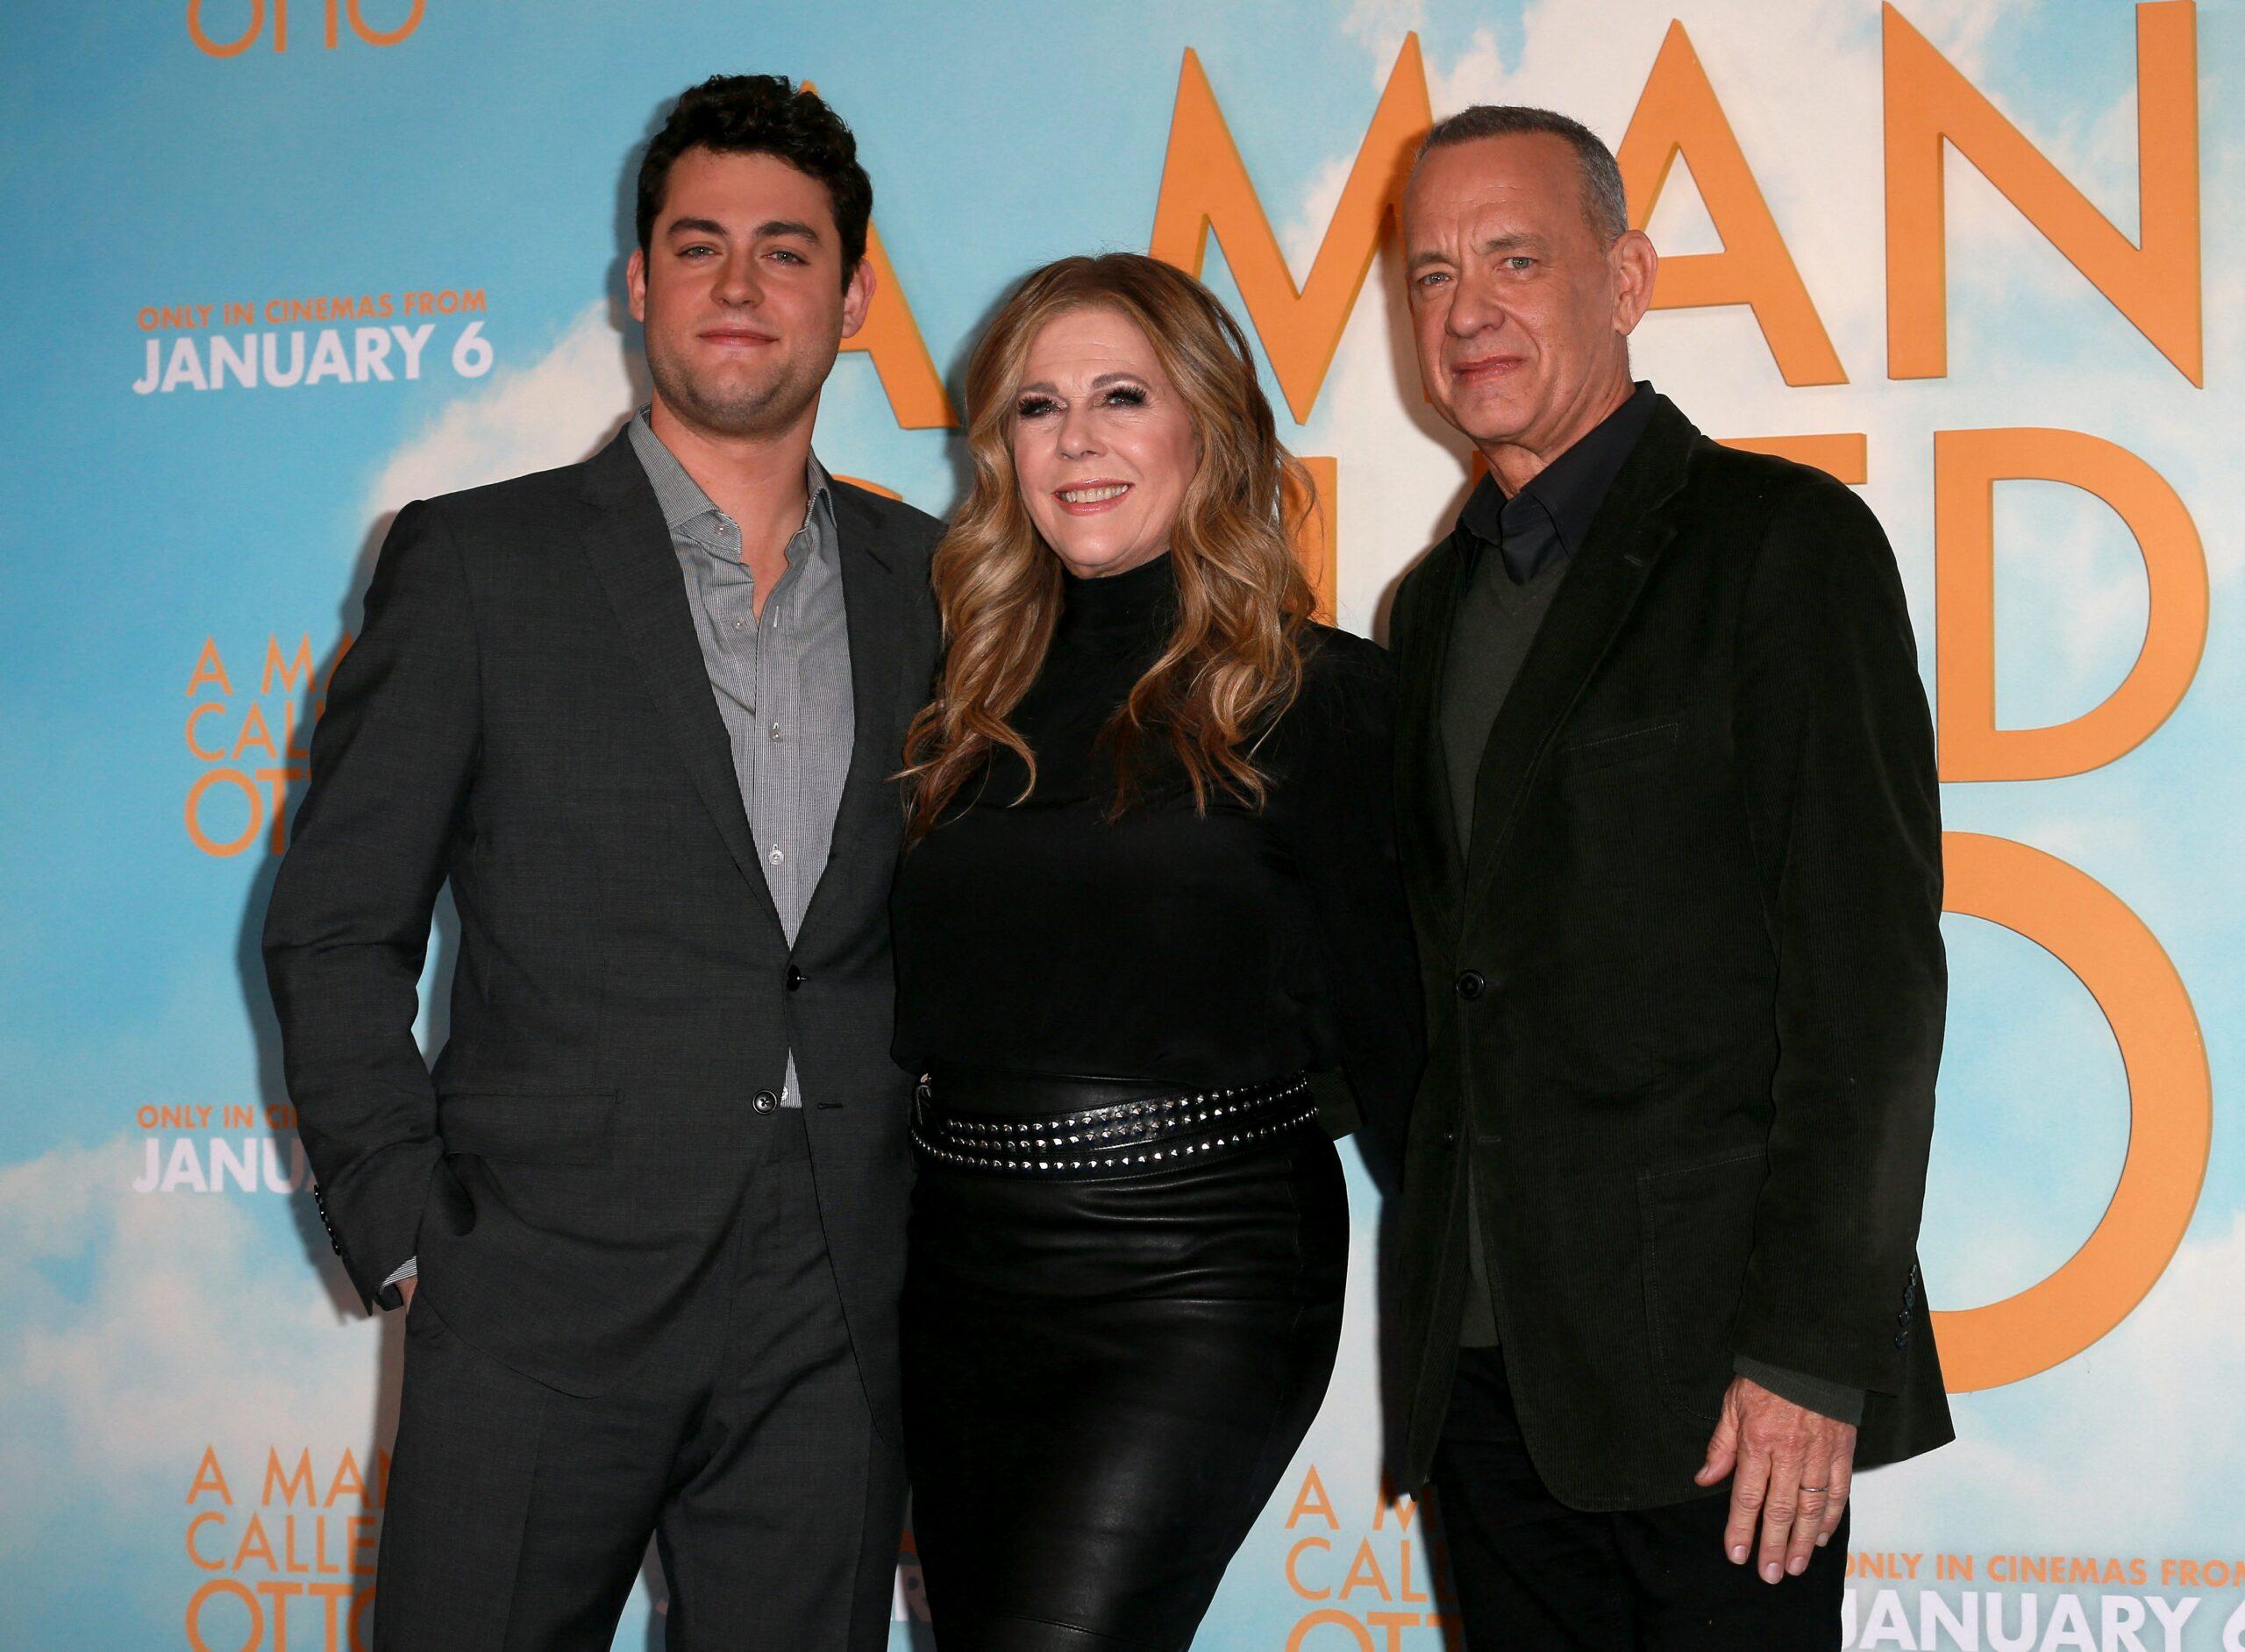 "A Man Called Otto" photocall at Corinthia Hotel on December 16, 2022 in London, England. 16 Dec 2023 Pictured: Truman Hanks, Rita Wilson and Tom Hanks. 